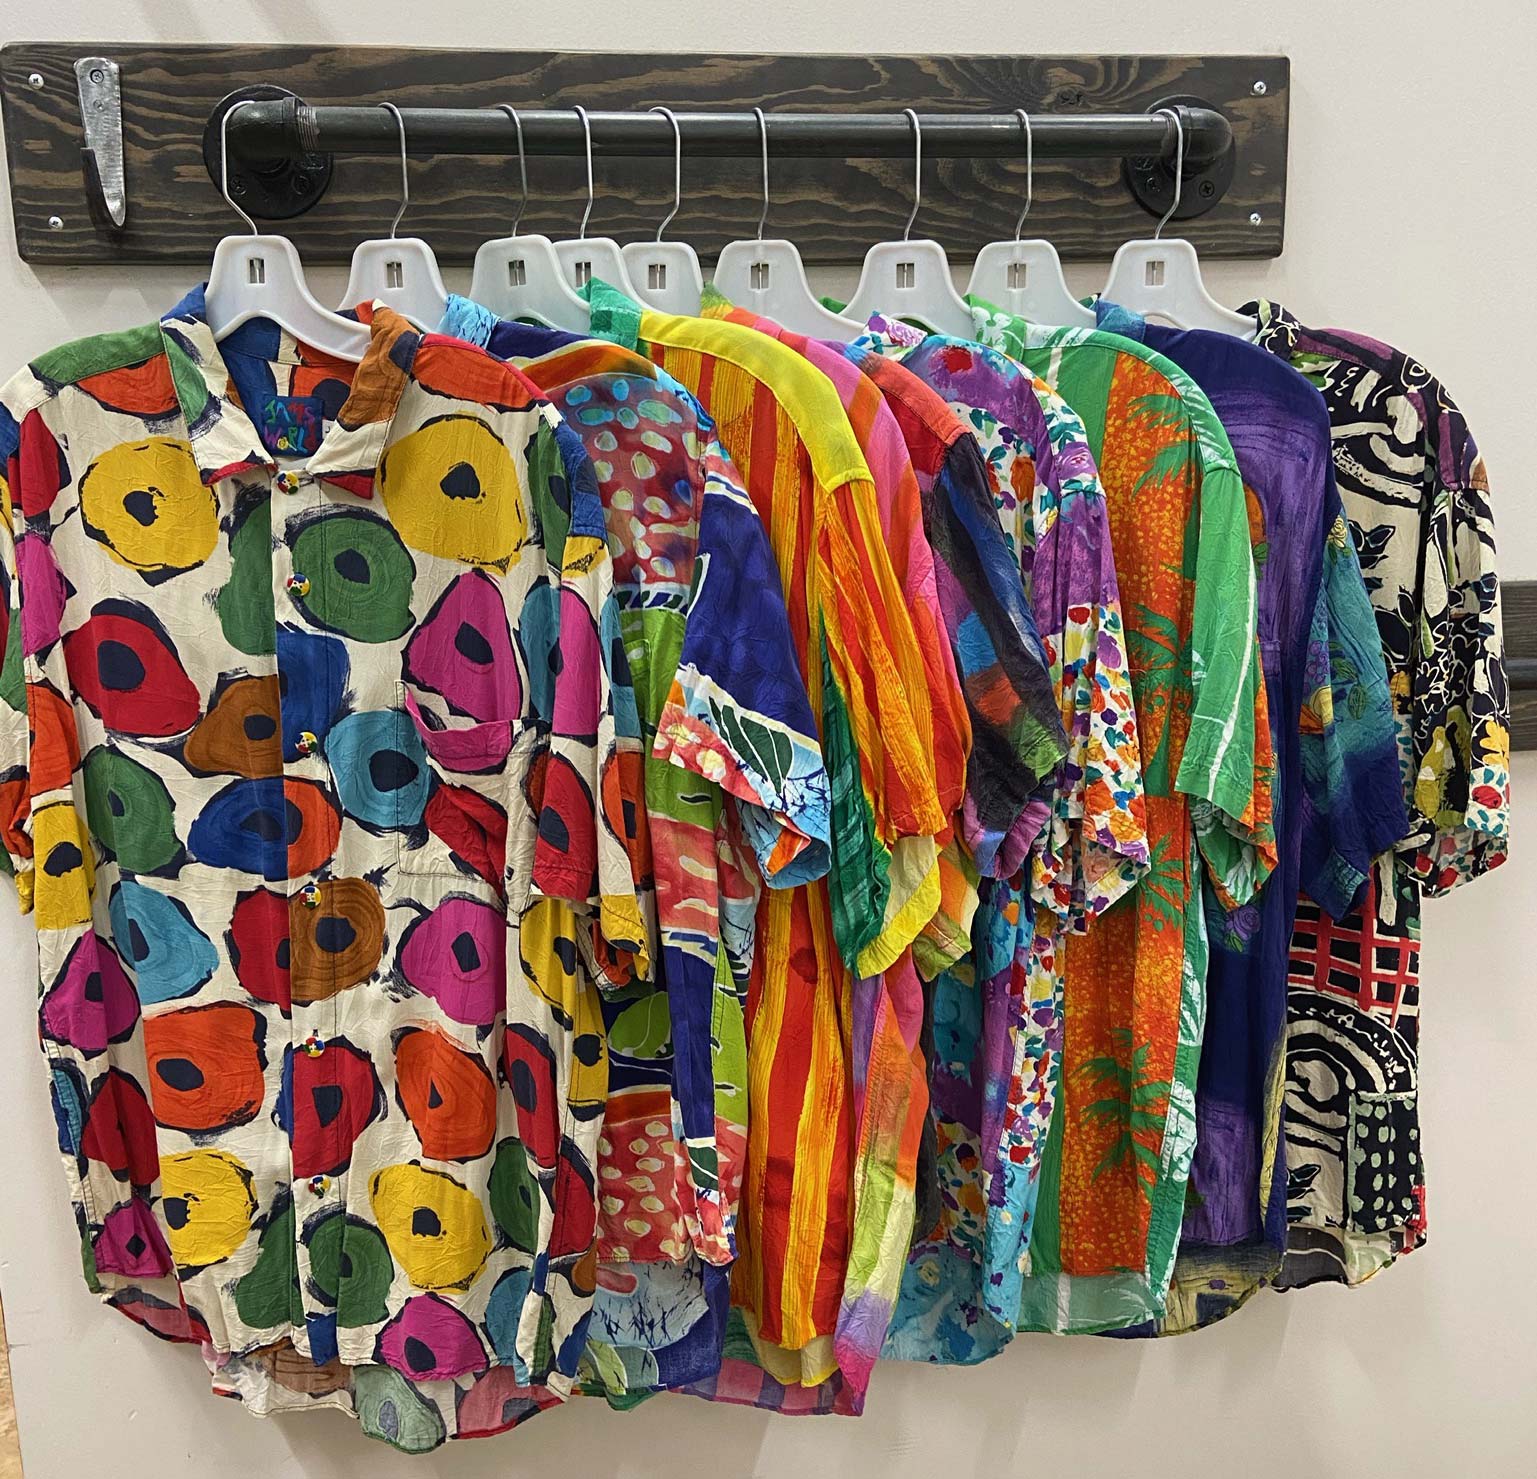 Colorful Jams World shirts hanging on rack Andersonville